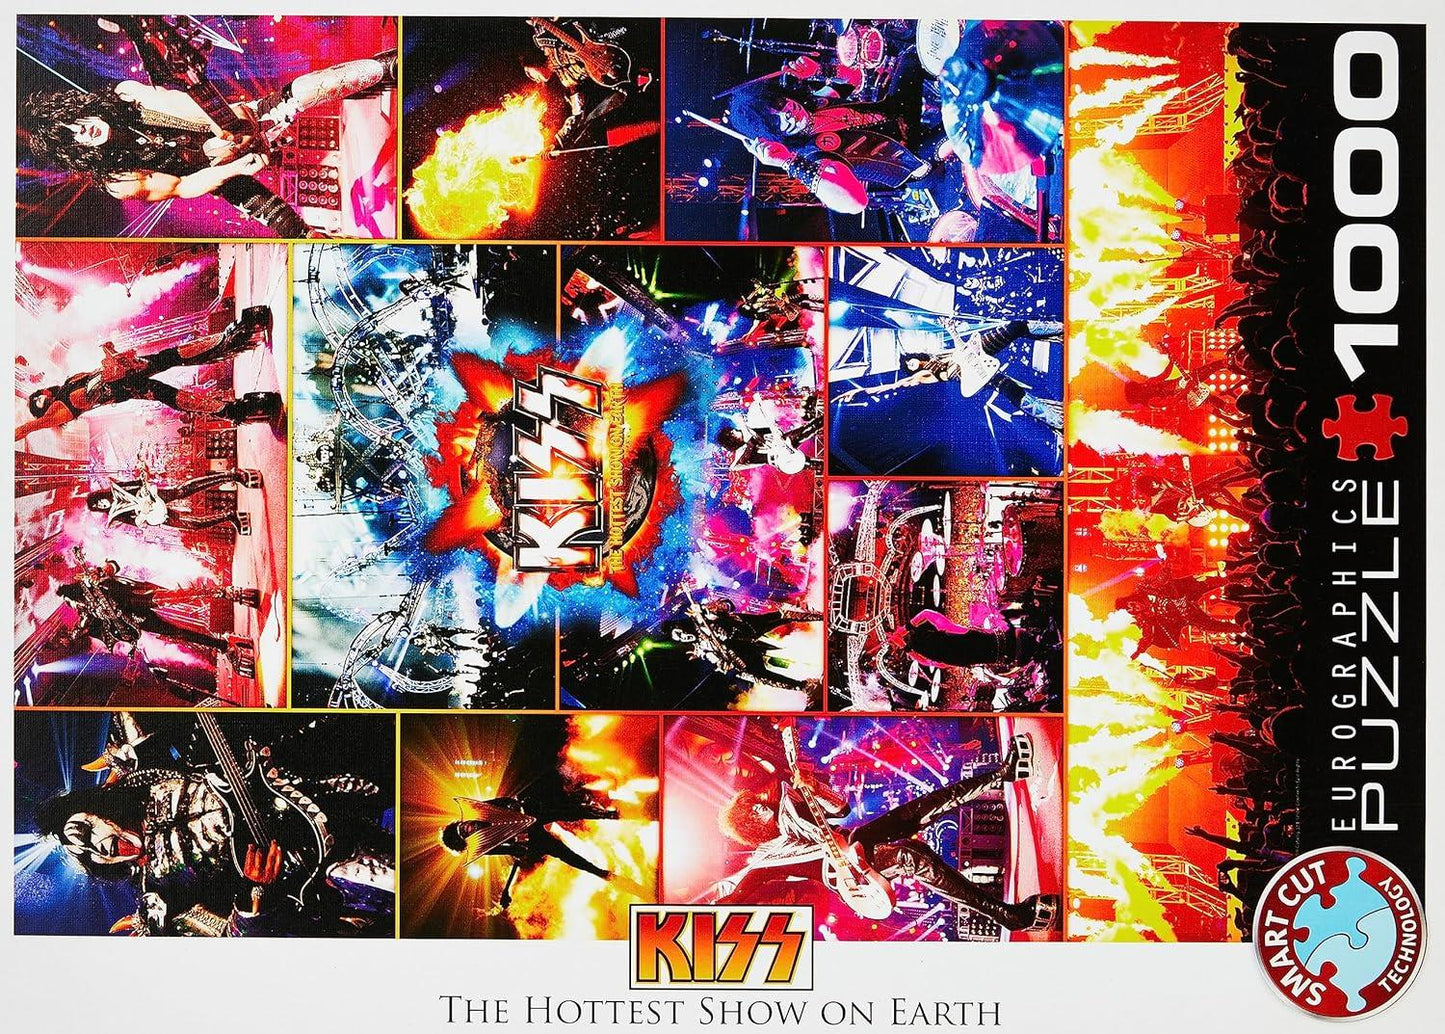 Eurographics - Kiss The Hottest Show on Earth - 1000 Piece Jigsaw Puzzle